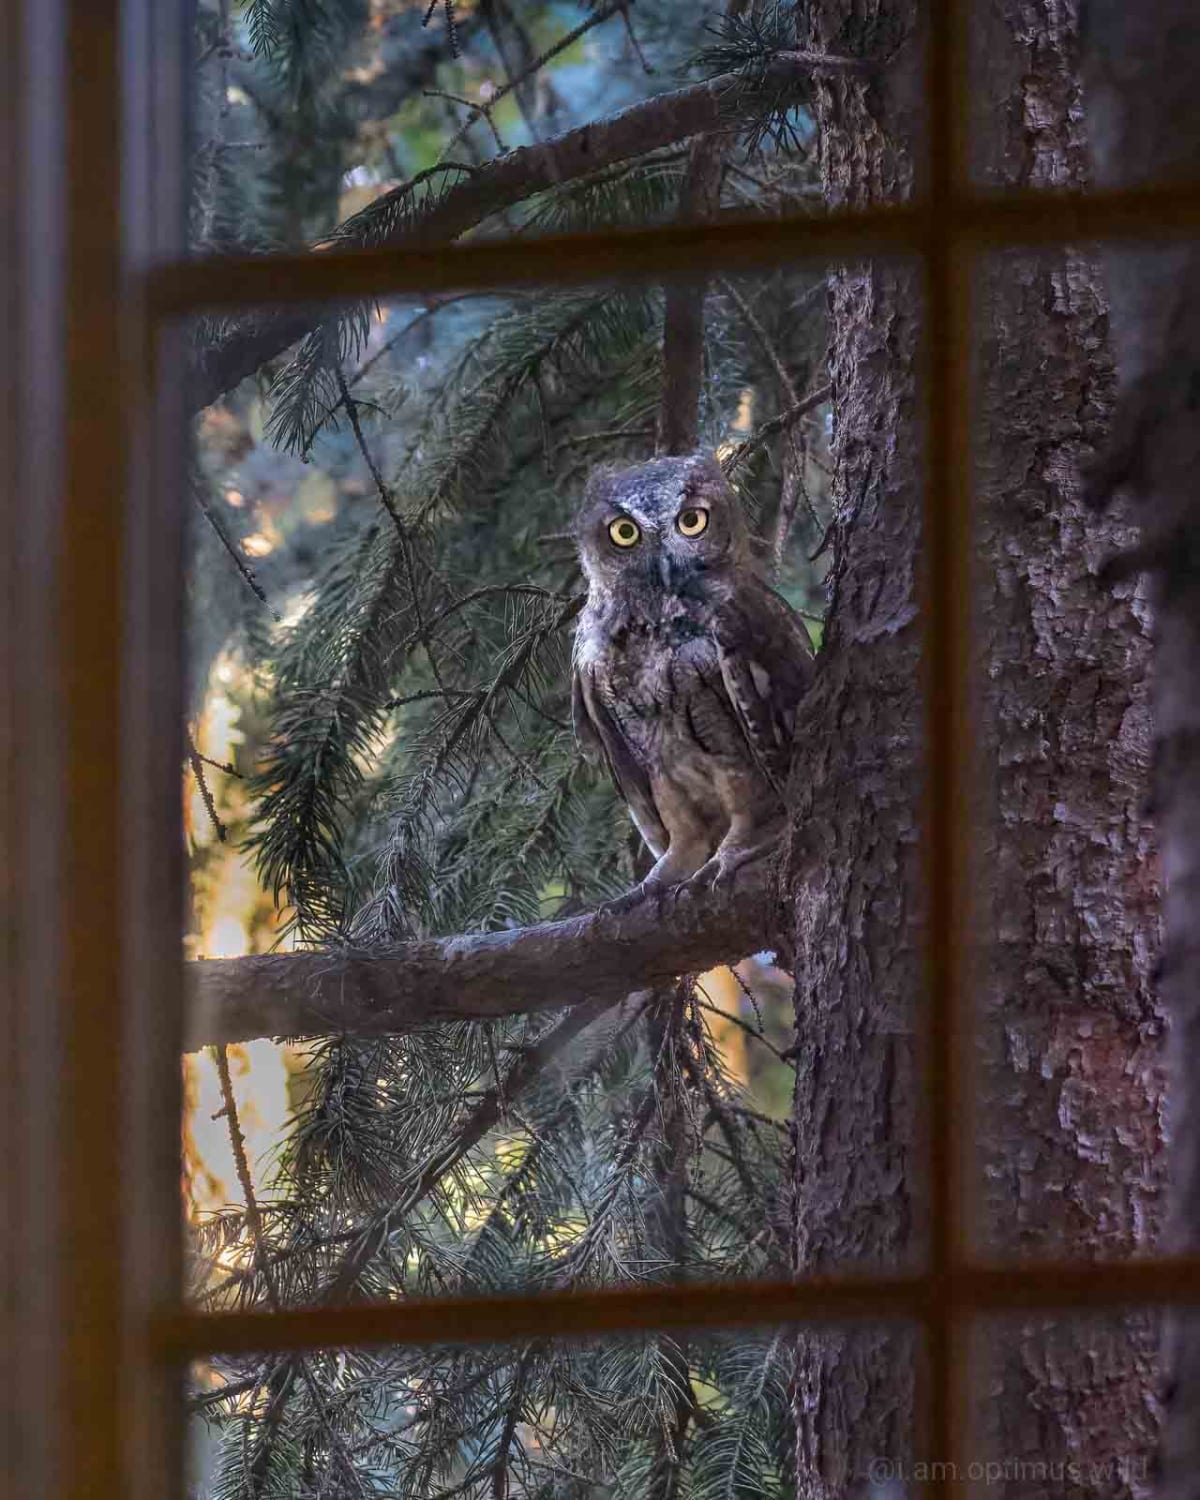 Feeling being watched recently, now I know hoo.